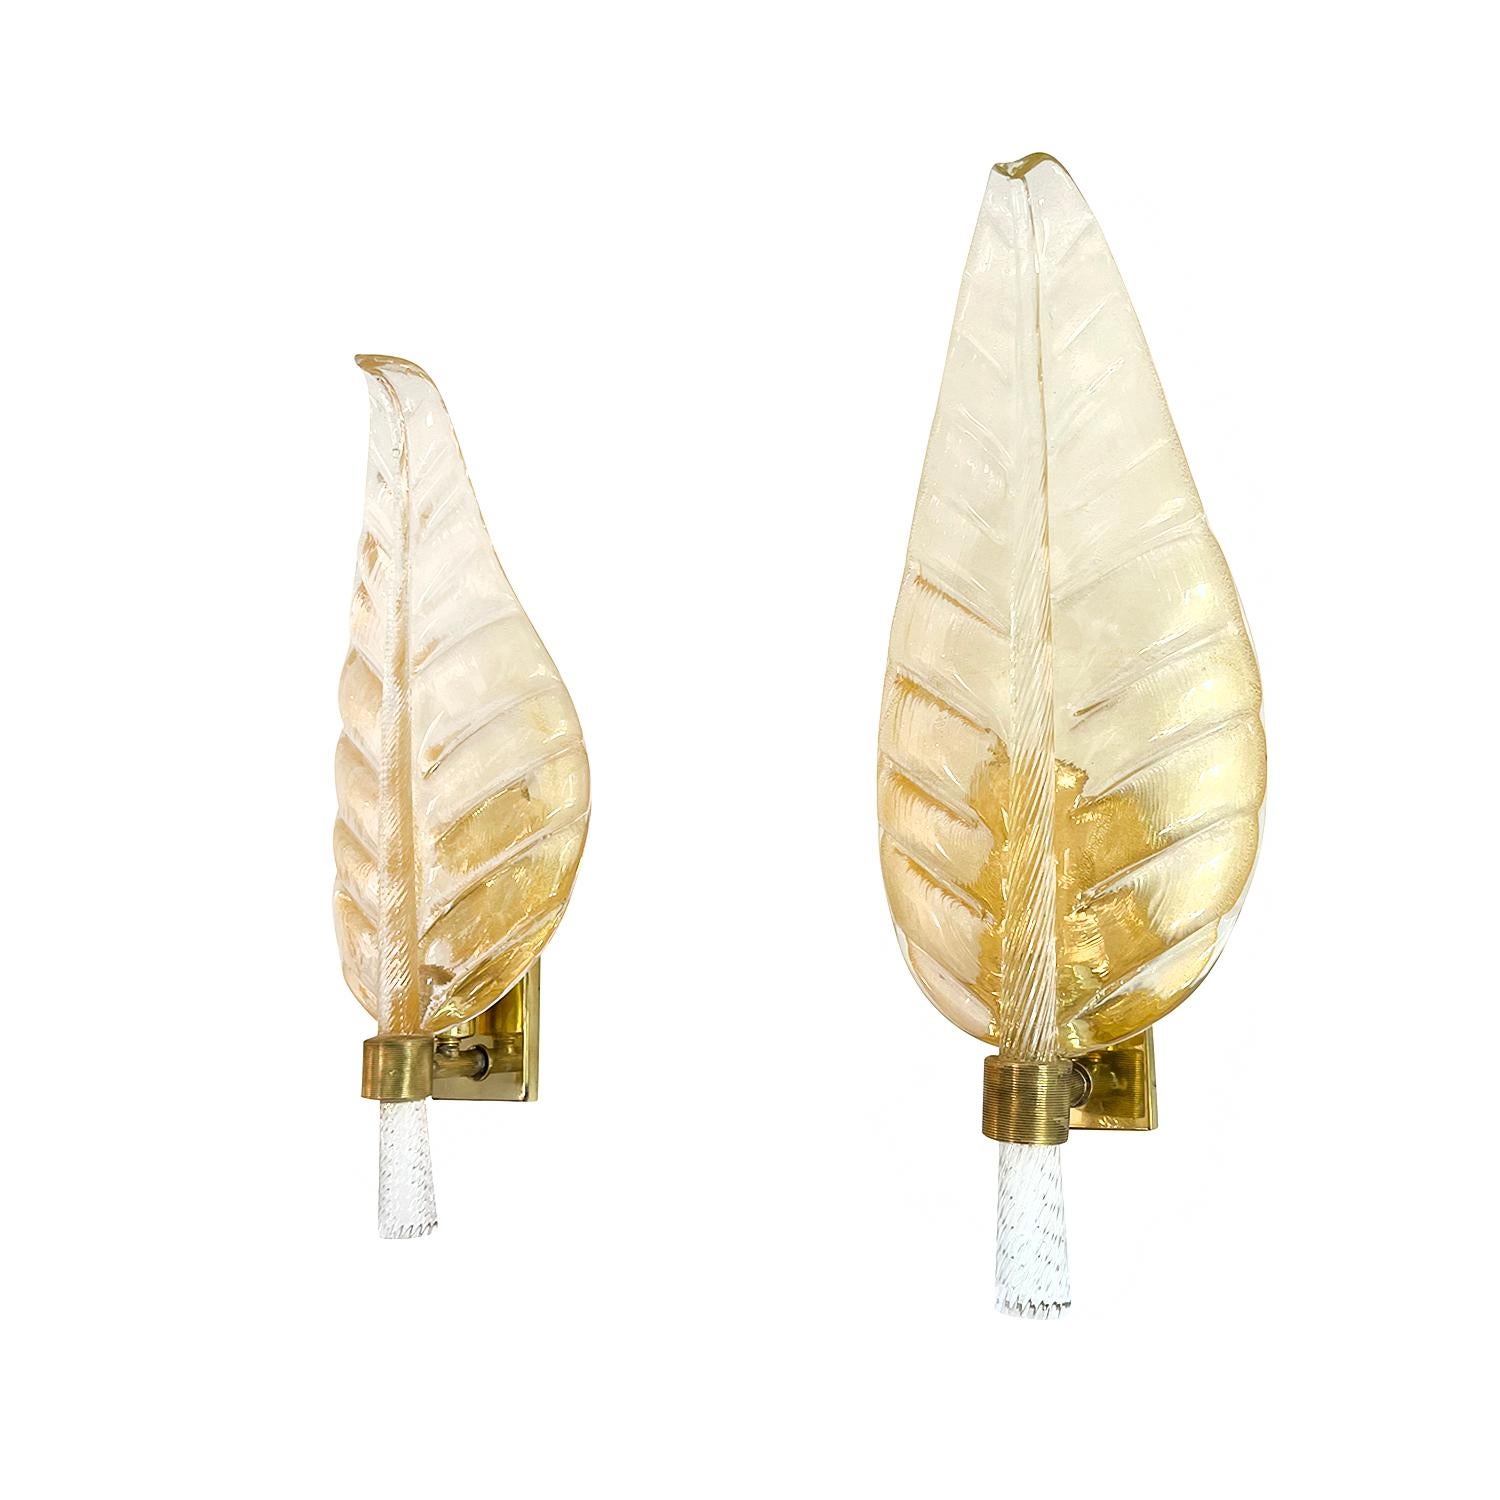 Mid-Century Modern 20th Century Italian Pair of Murano Glass Oro Sommerso, Brass Leaf Wall Sconces